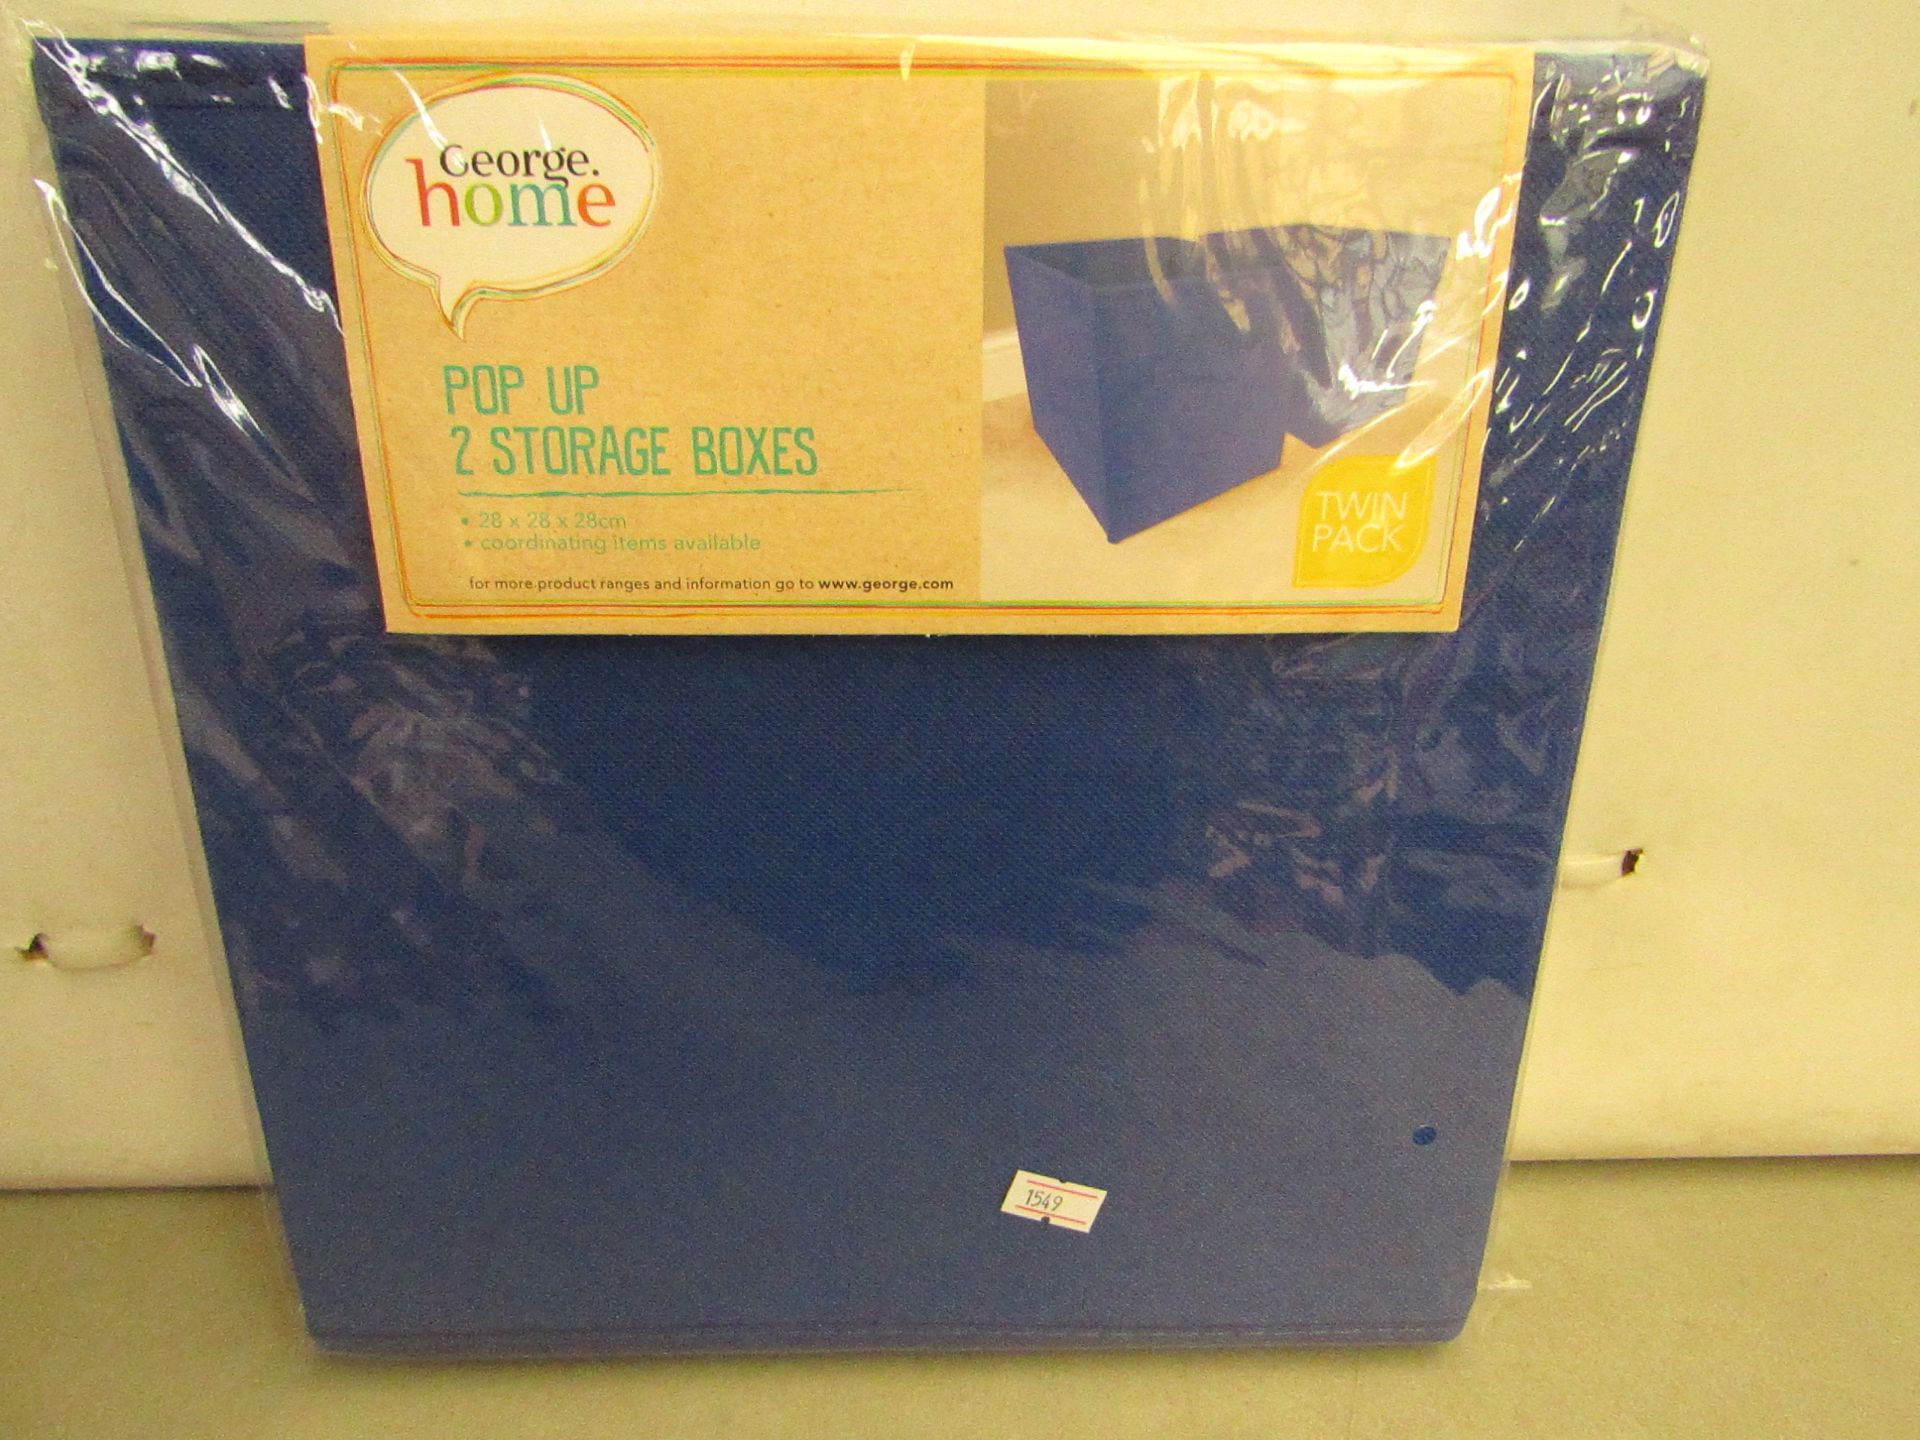 4 x 2 Packs of GH Pop Up Storage Bopxes. 28cm x 28cm x 28cm. New & Packaged. Ideal for kids